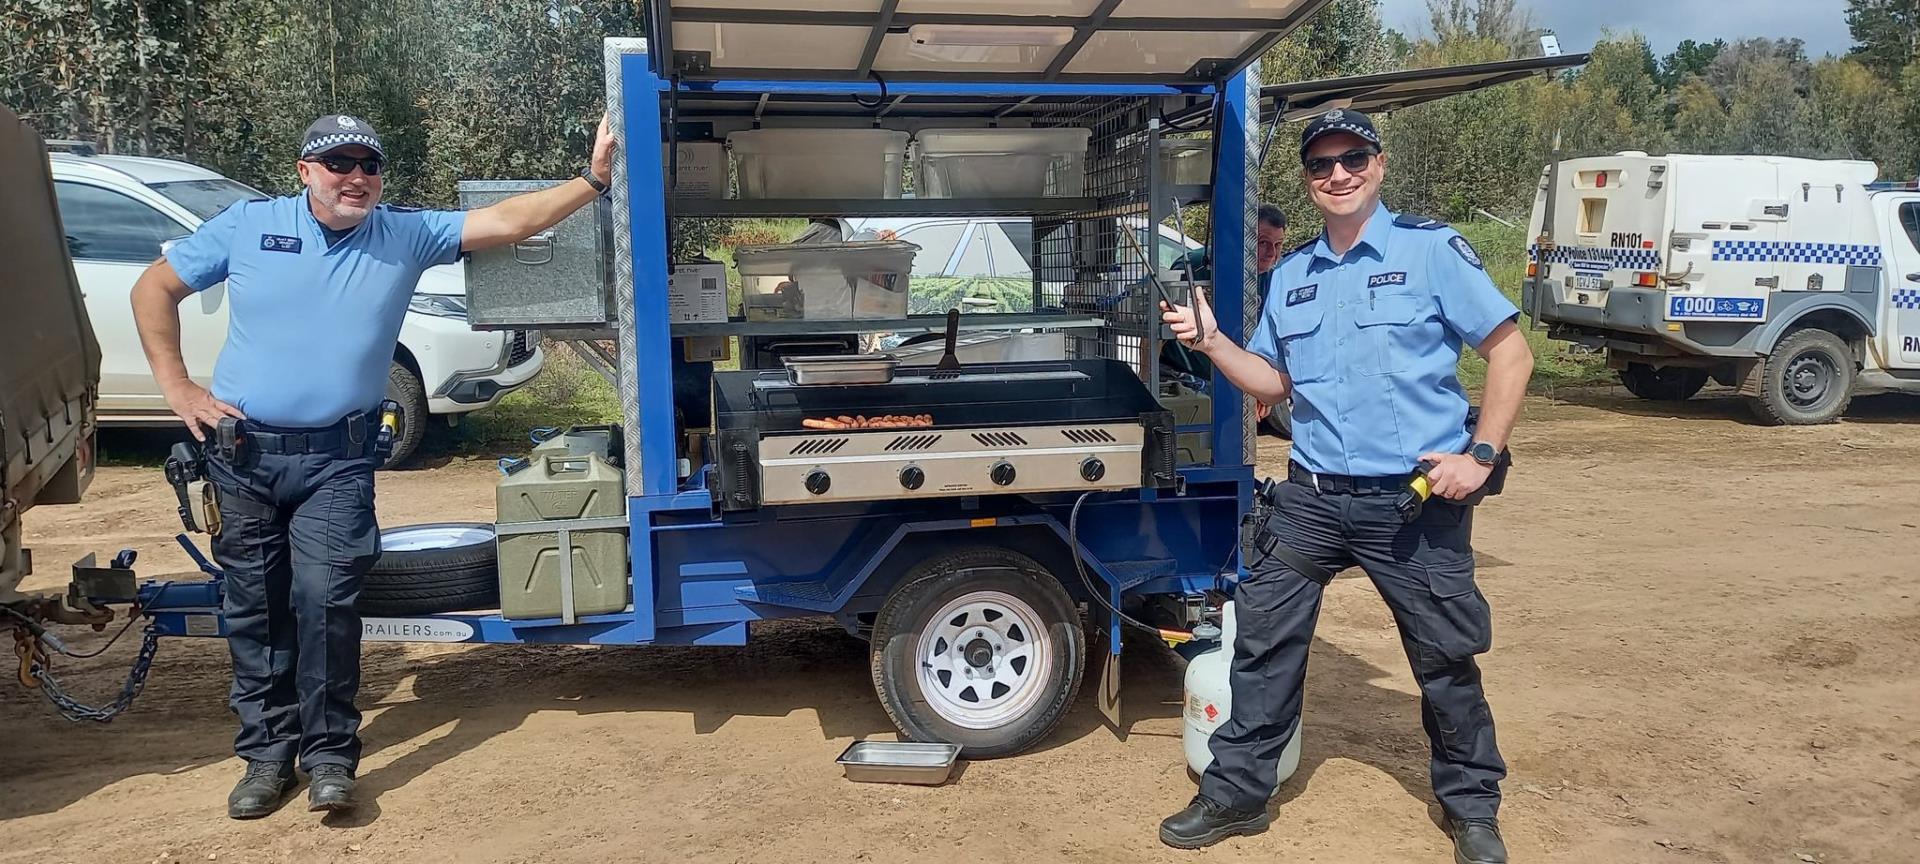 Nannup Police stand ready at the BBQ, thanks to the Nannup Lions Club